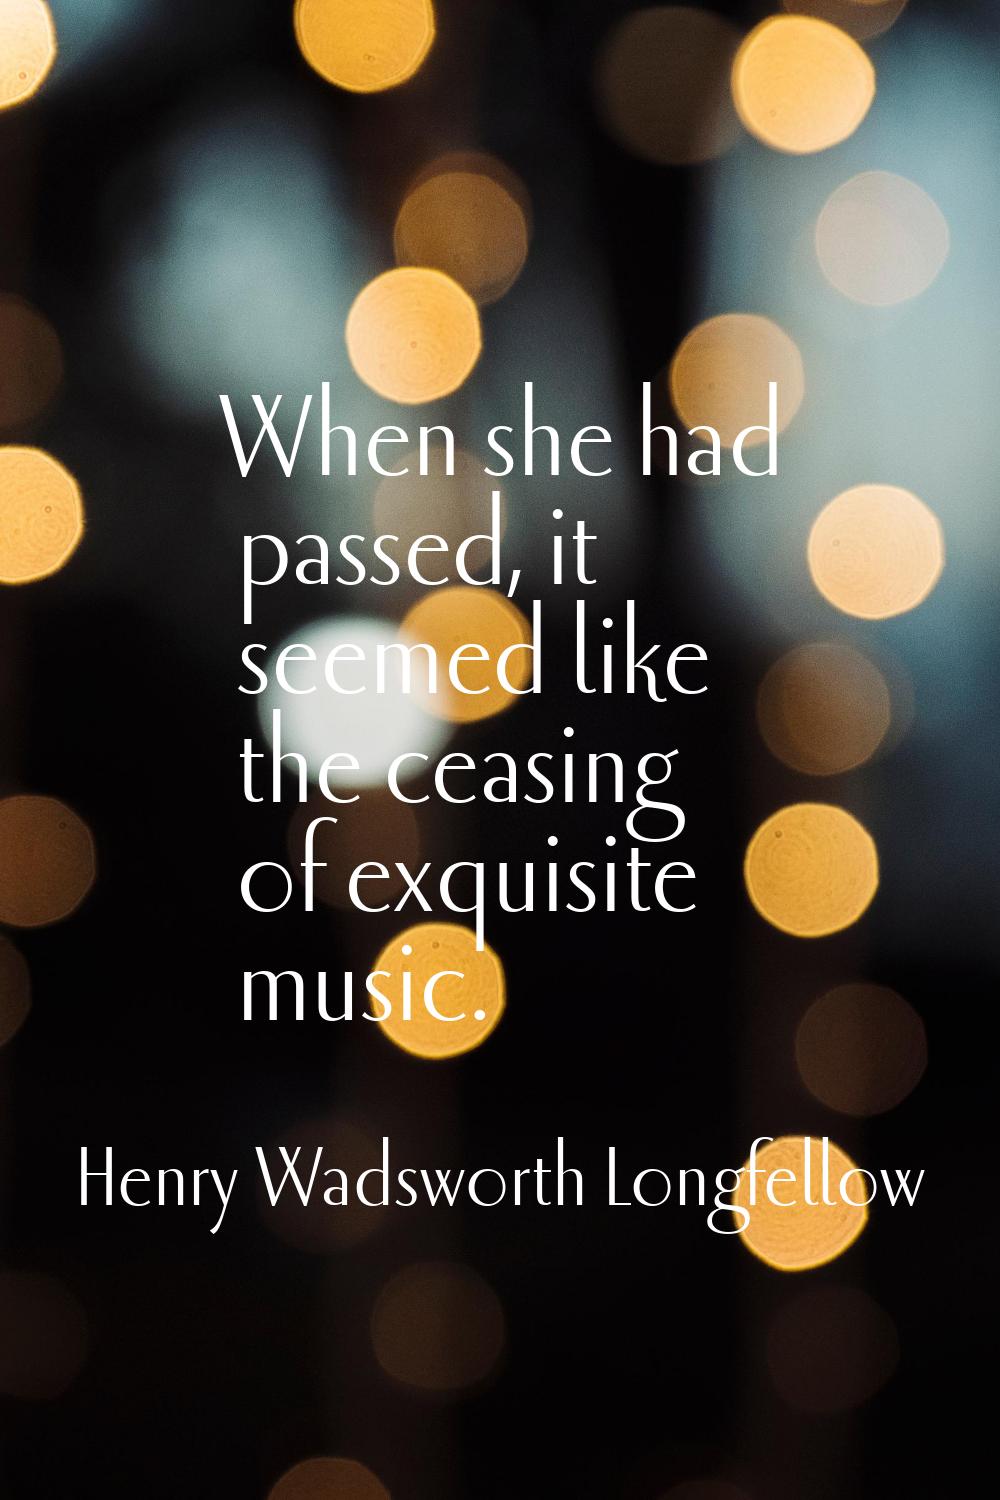 When she had passed, it seemed like the ceasing of exquisite music.